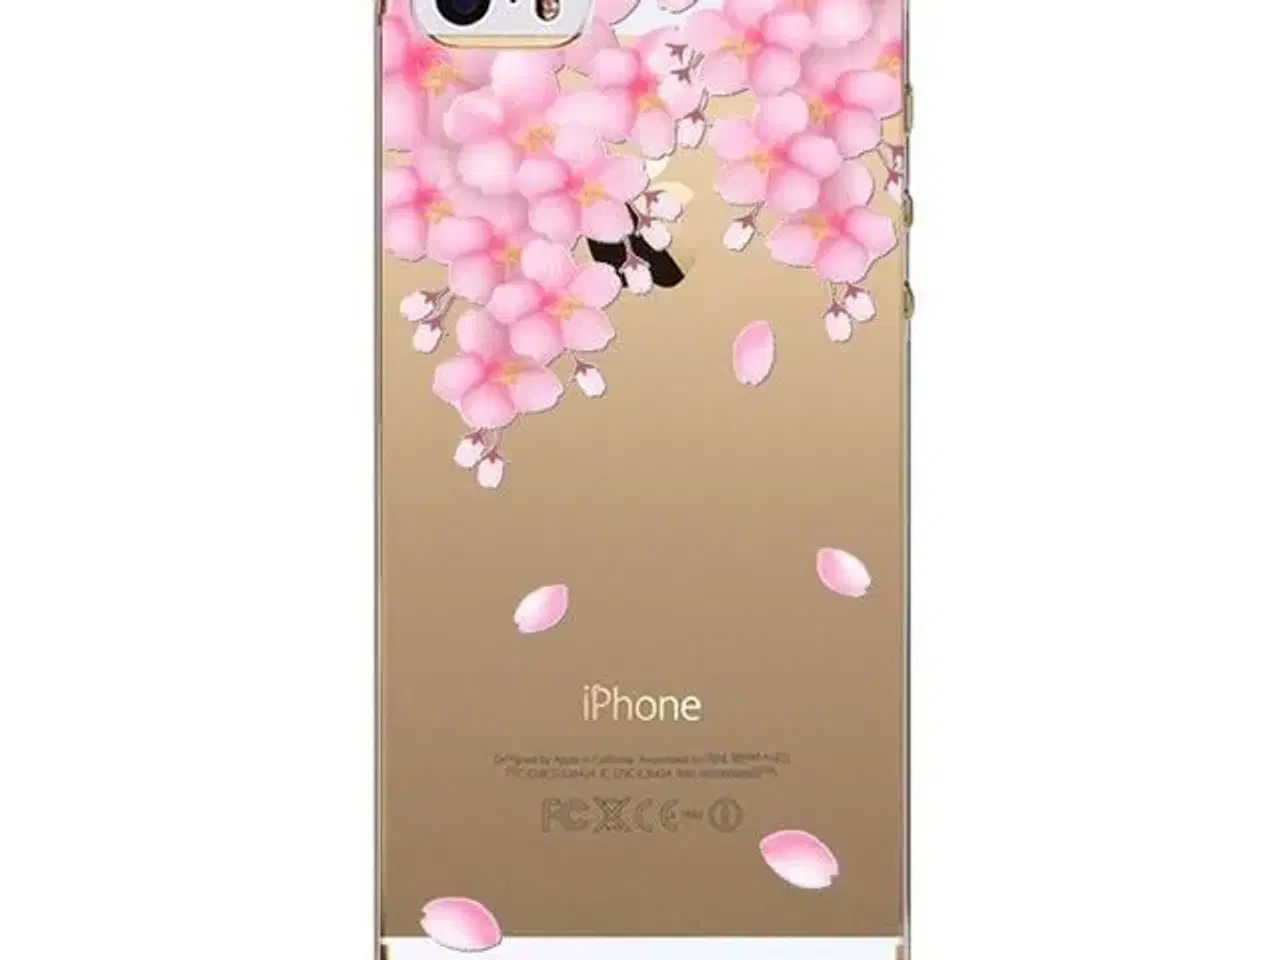 Billede 2 - Silikone cover iPhone 4 4s 5 5s SE 6 6s 6 PLUS 